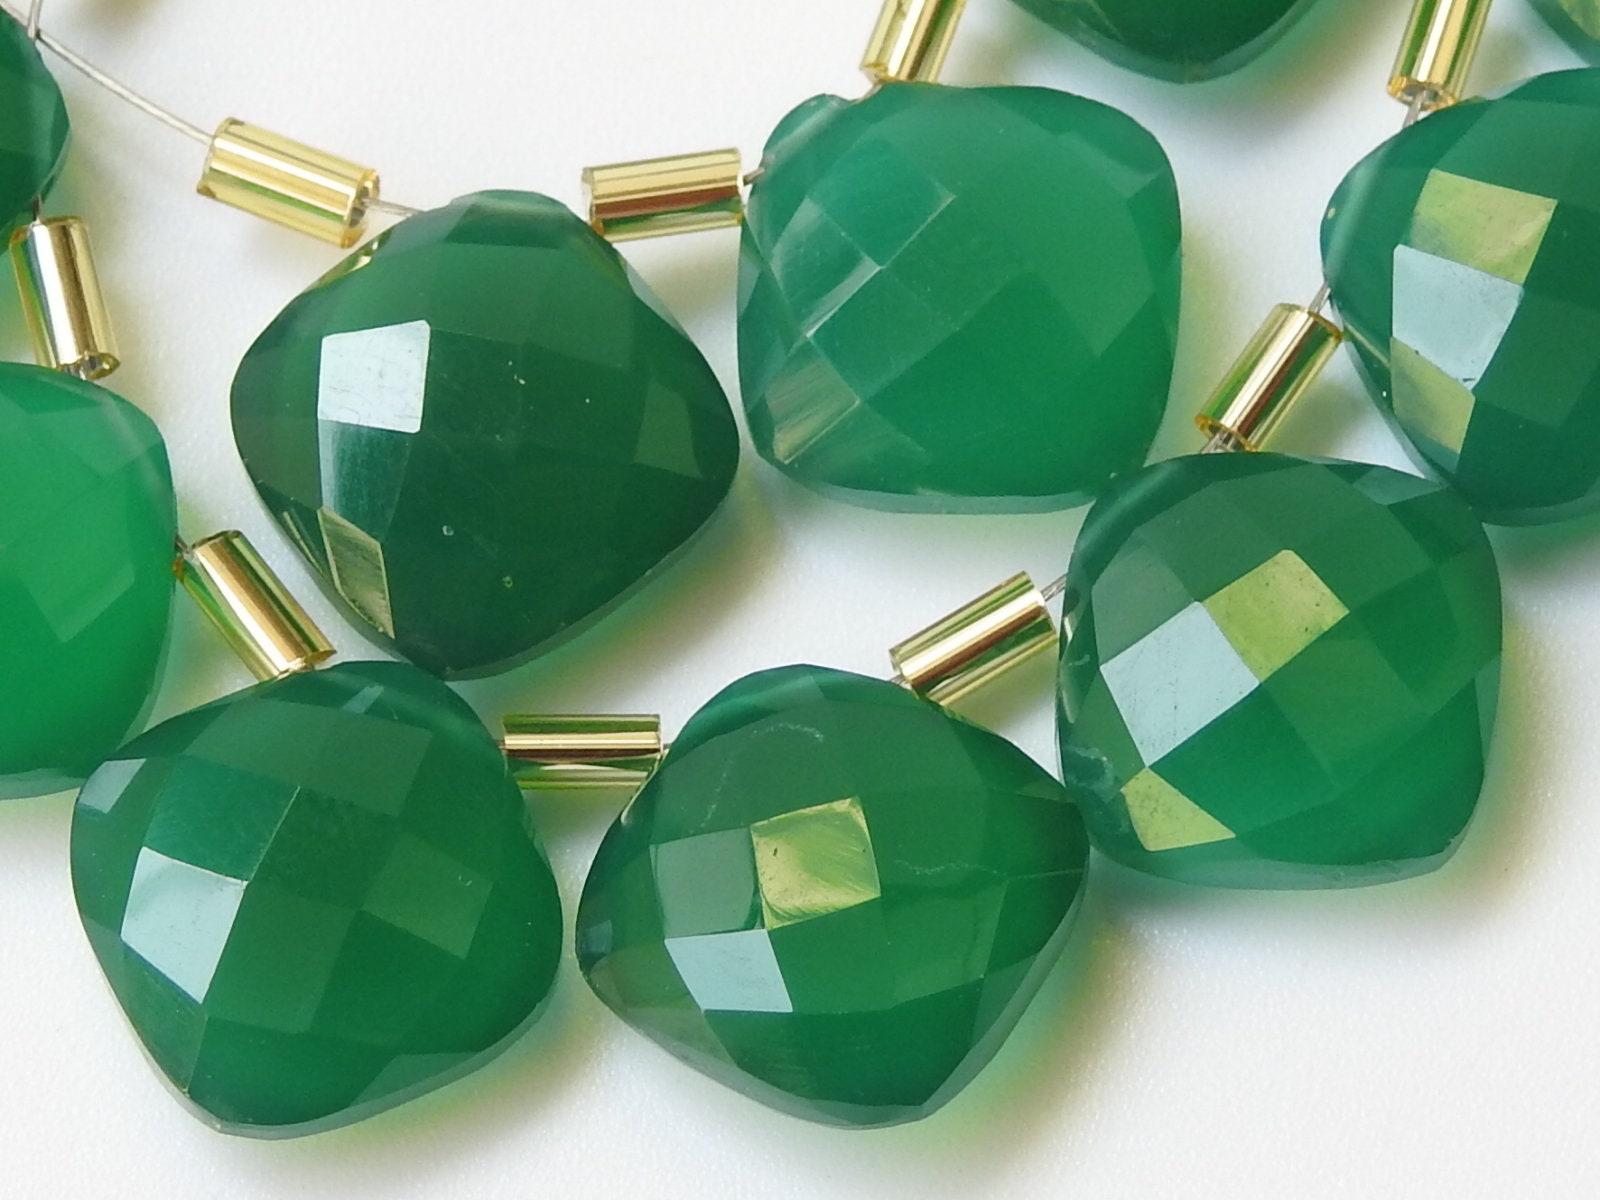 12X12MM Pair,Green Onyx Faceted Cushions,Square Shape Briolette,Teardrop,Loose Stone,Earrings Jewelry,Wholesaler,Supplies PME-CY1 | Save 33% - Rajasthan Living 13